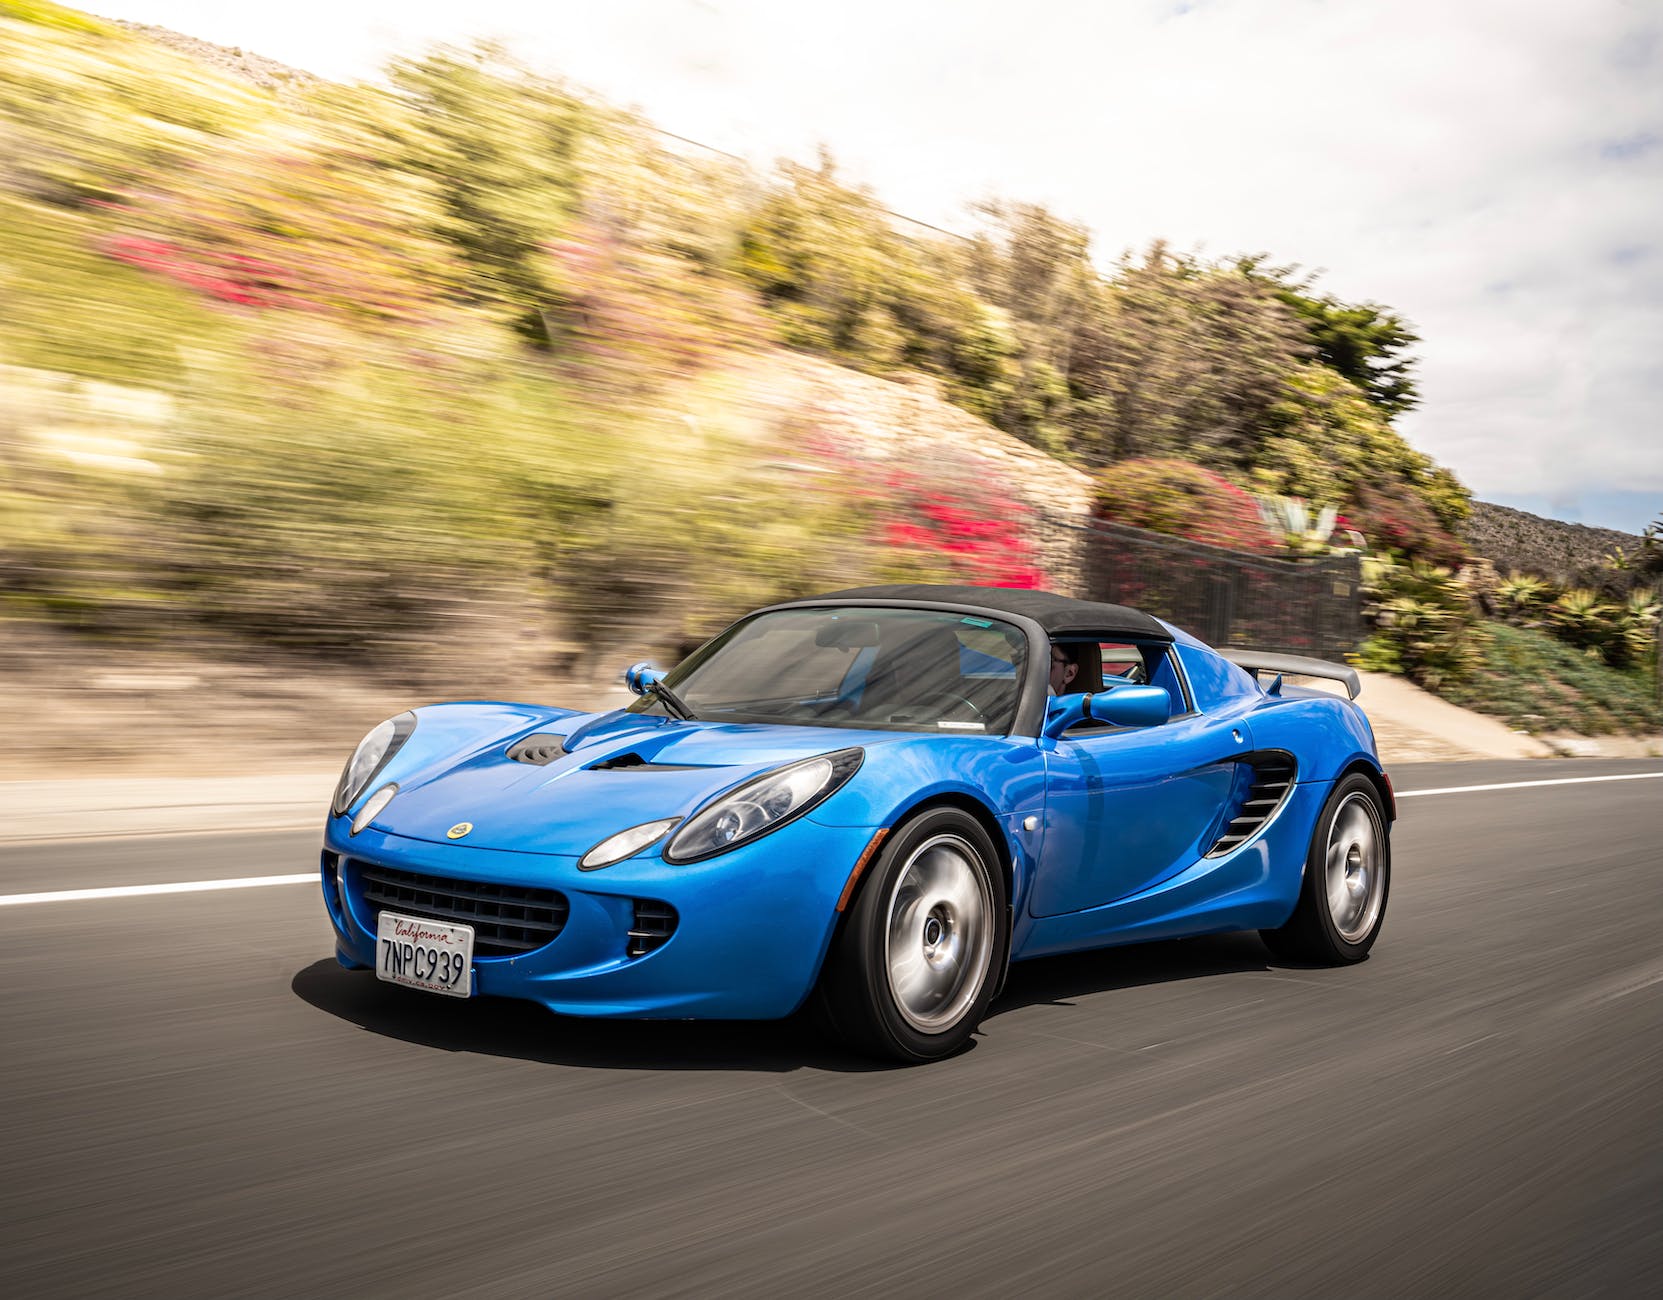 a blue lotus elise moving on the road